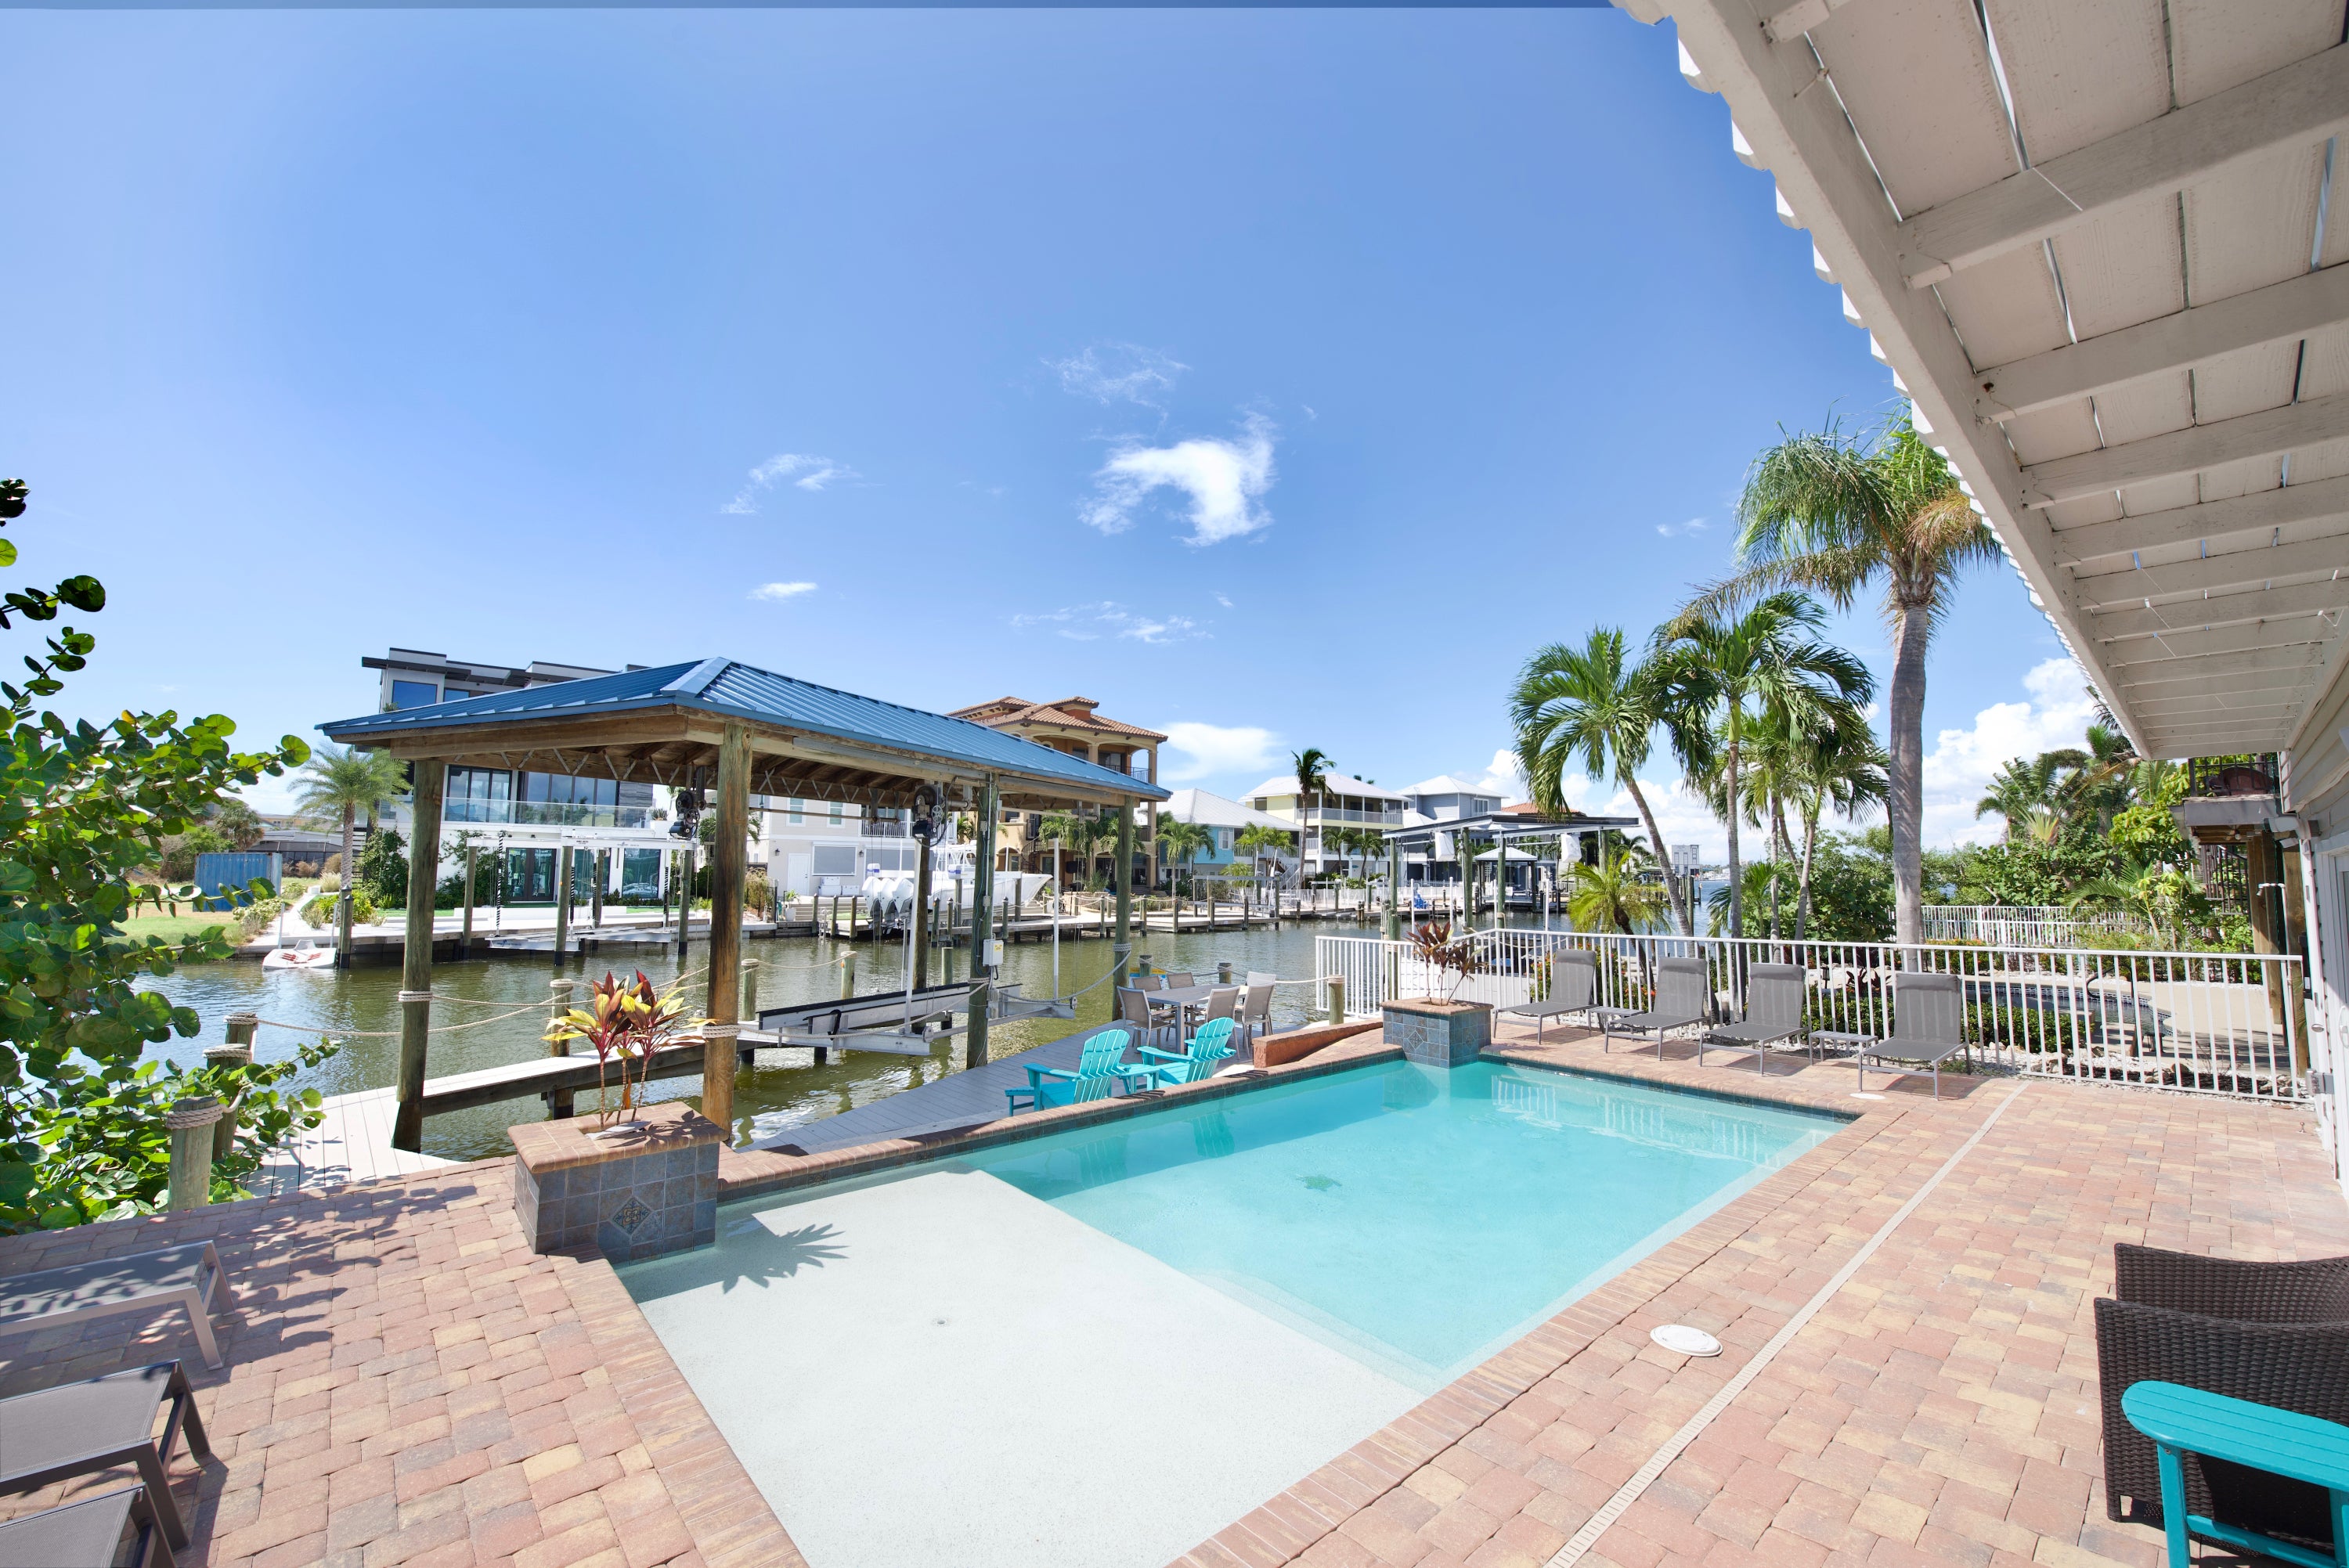 Spacious pool area with dock